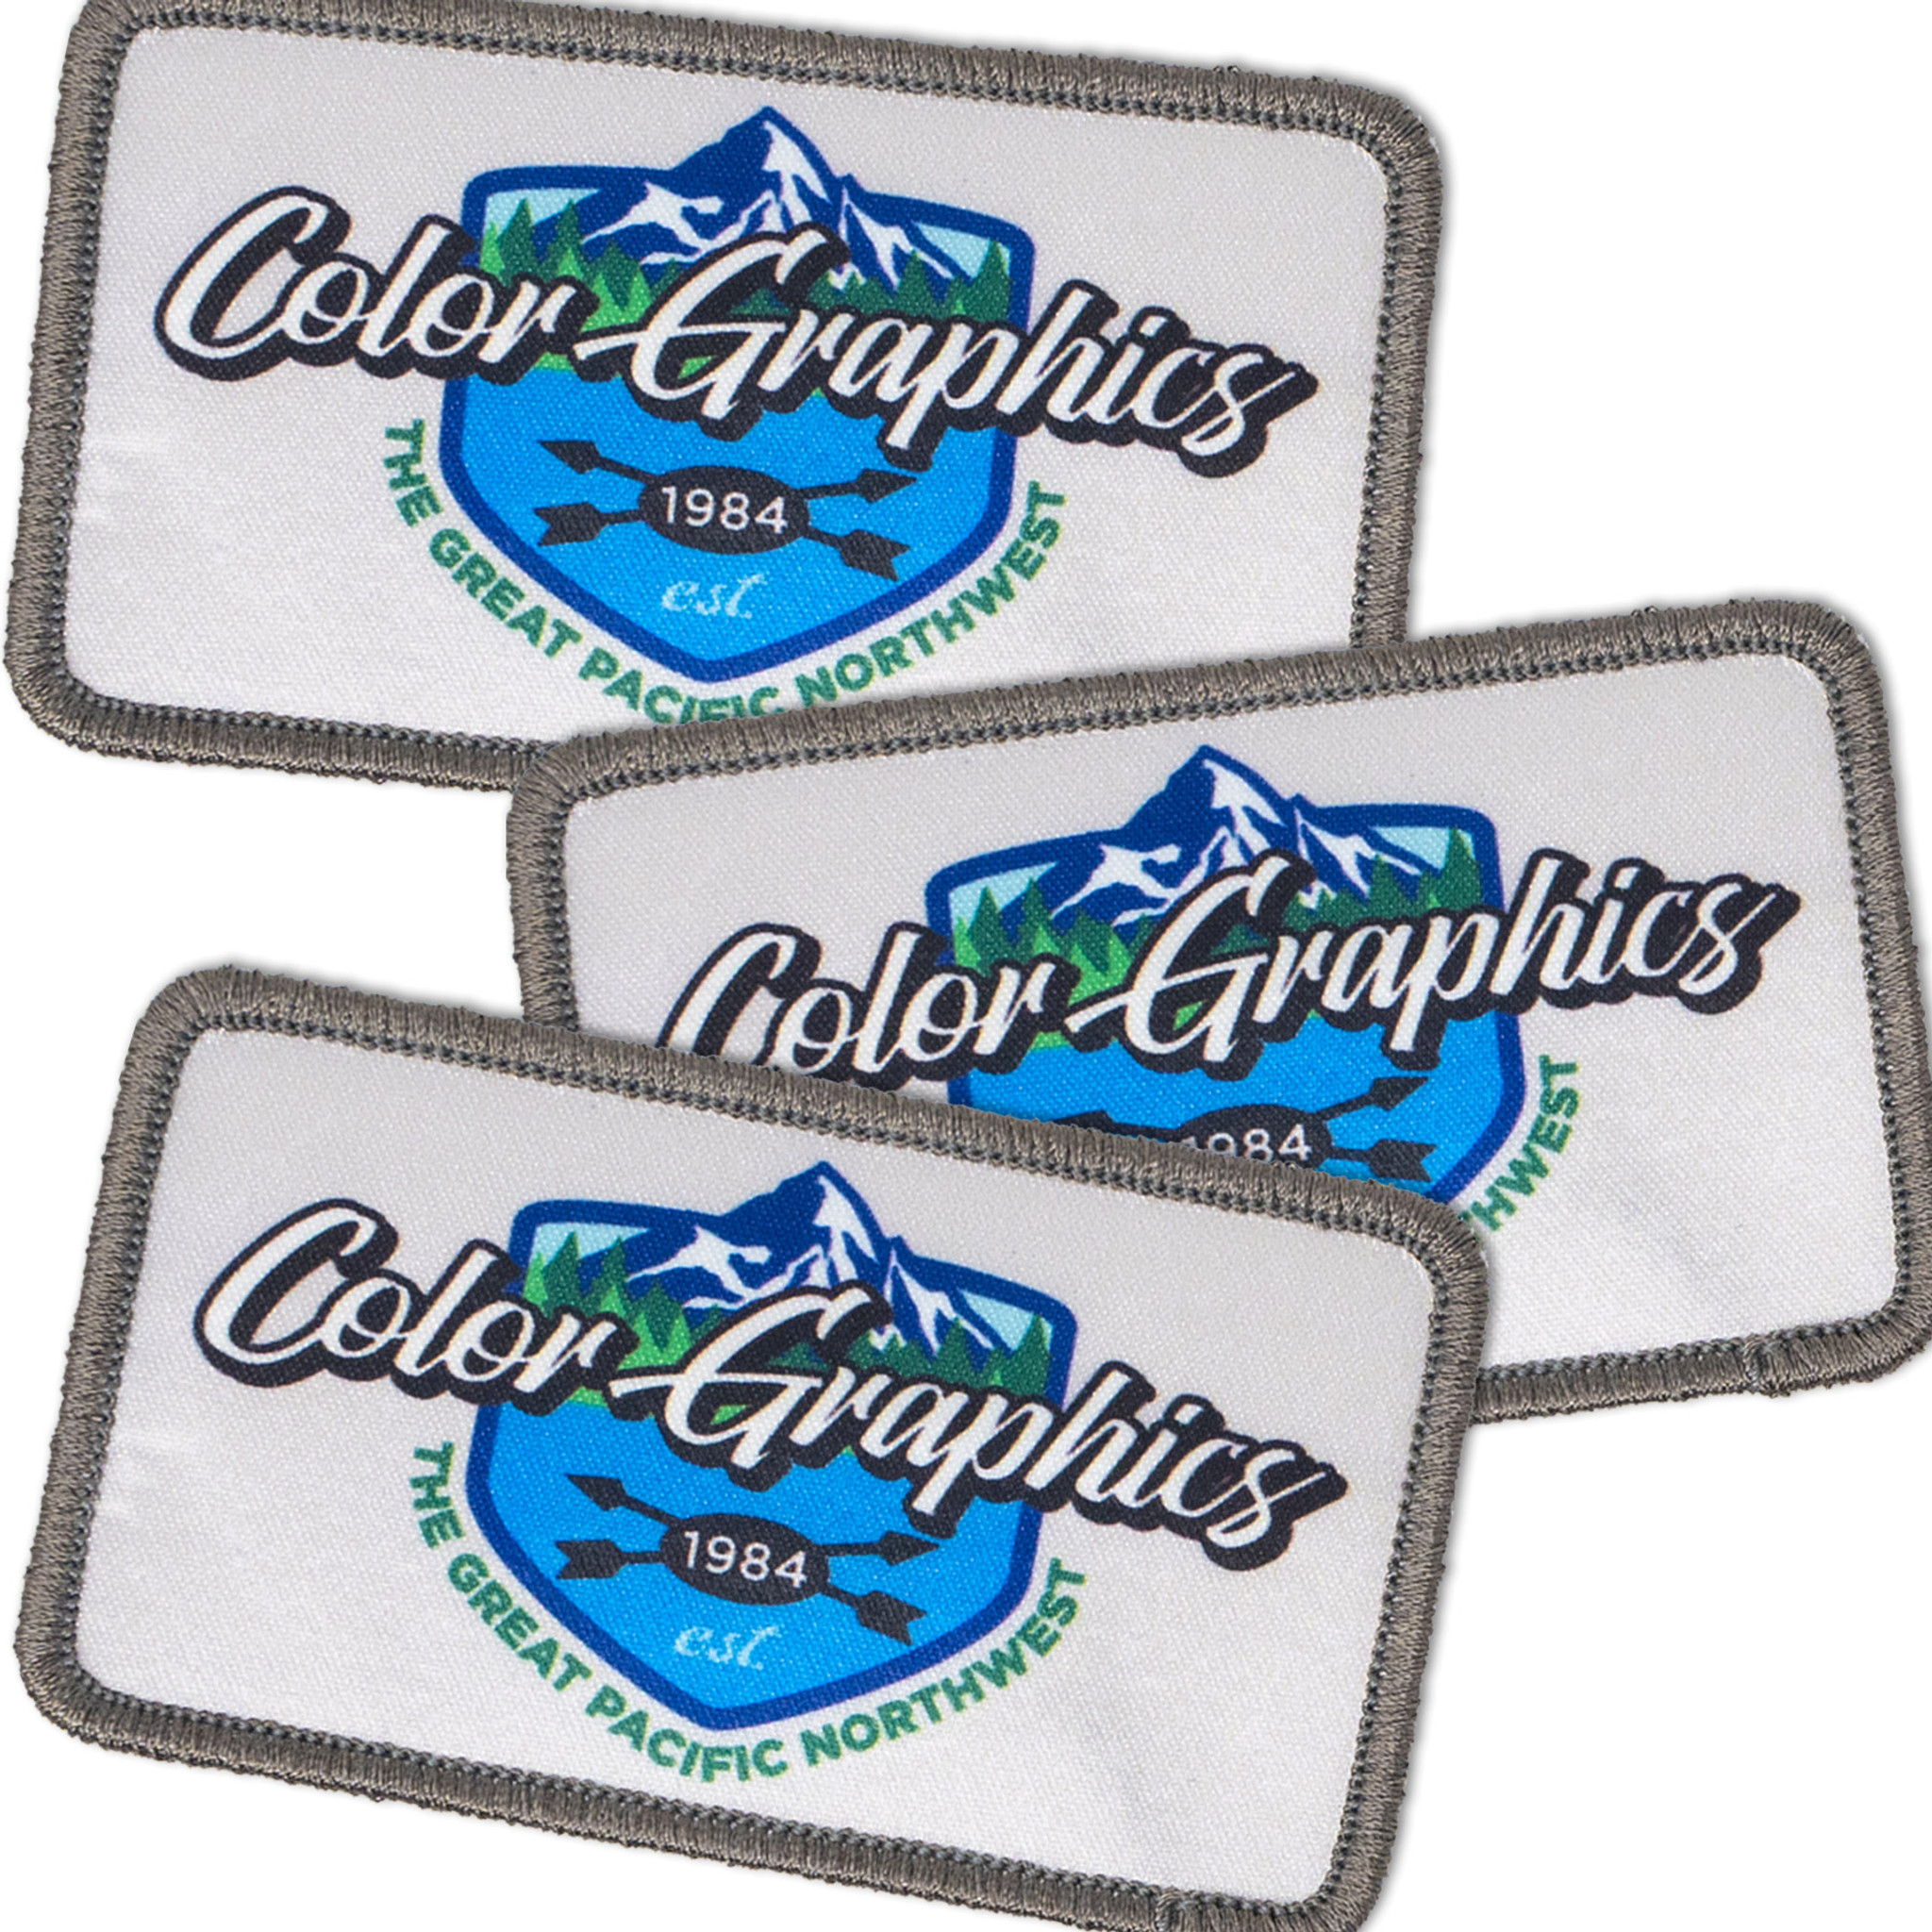 Sublimated Patch - Item #PTCHSUB -  Custom Printed  Promotional Products